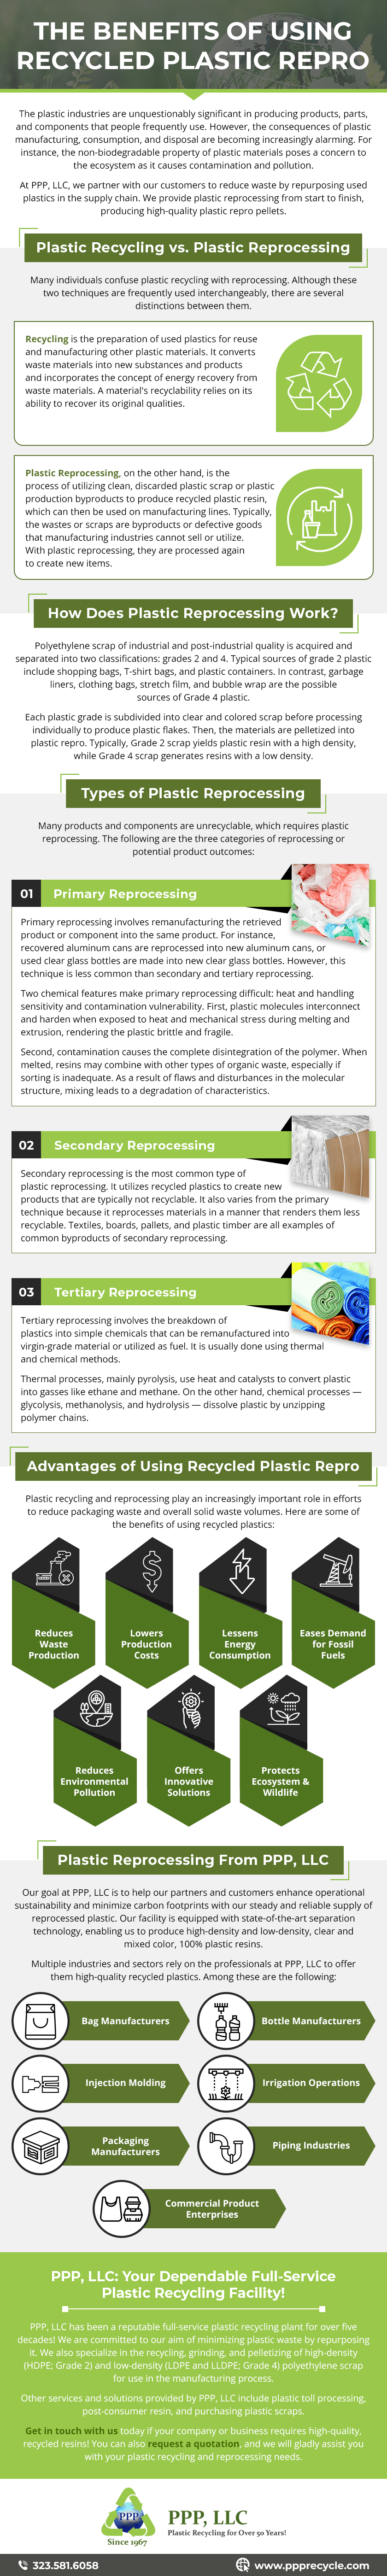 The-Benefits-of-Using-Recycled-Plastic-Repro